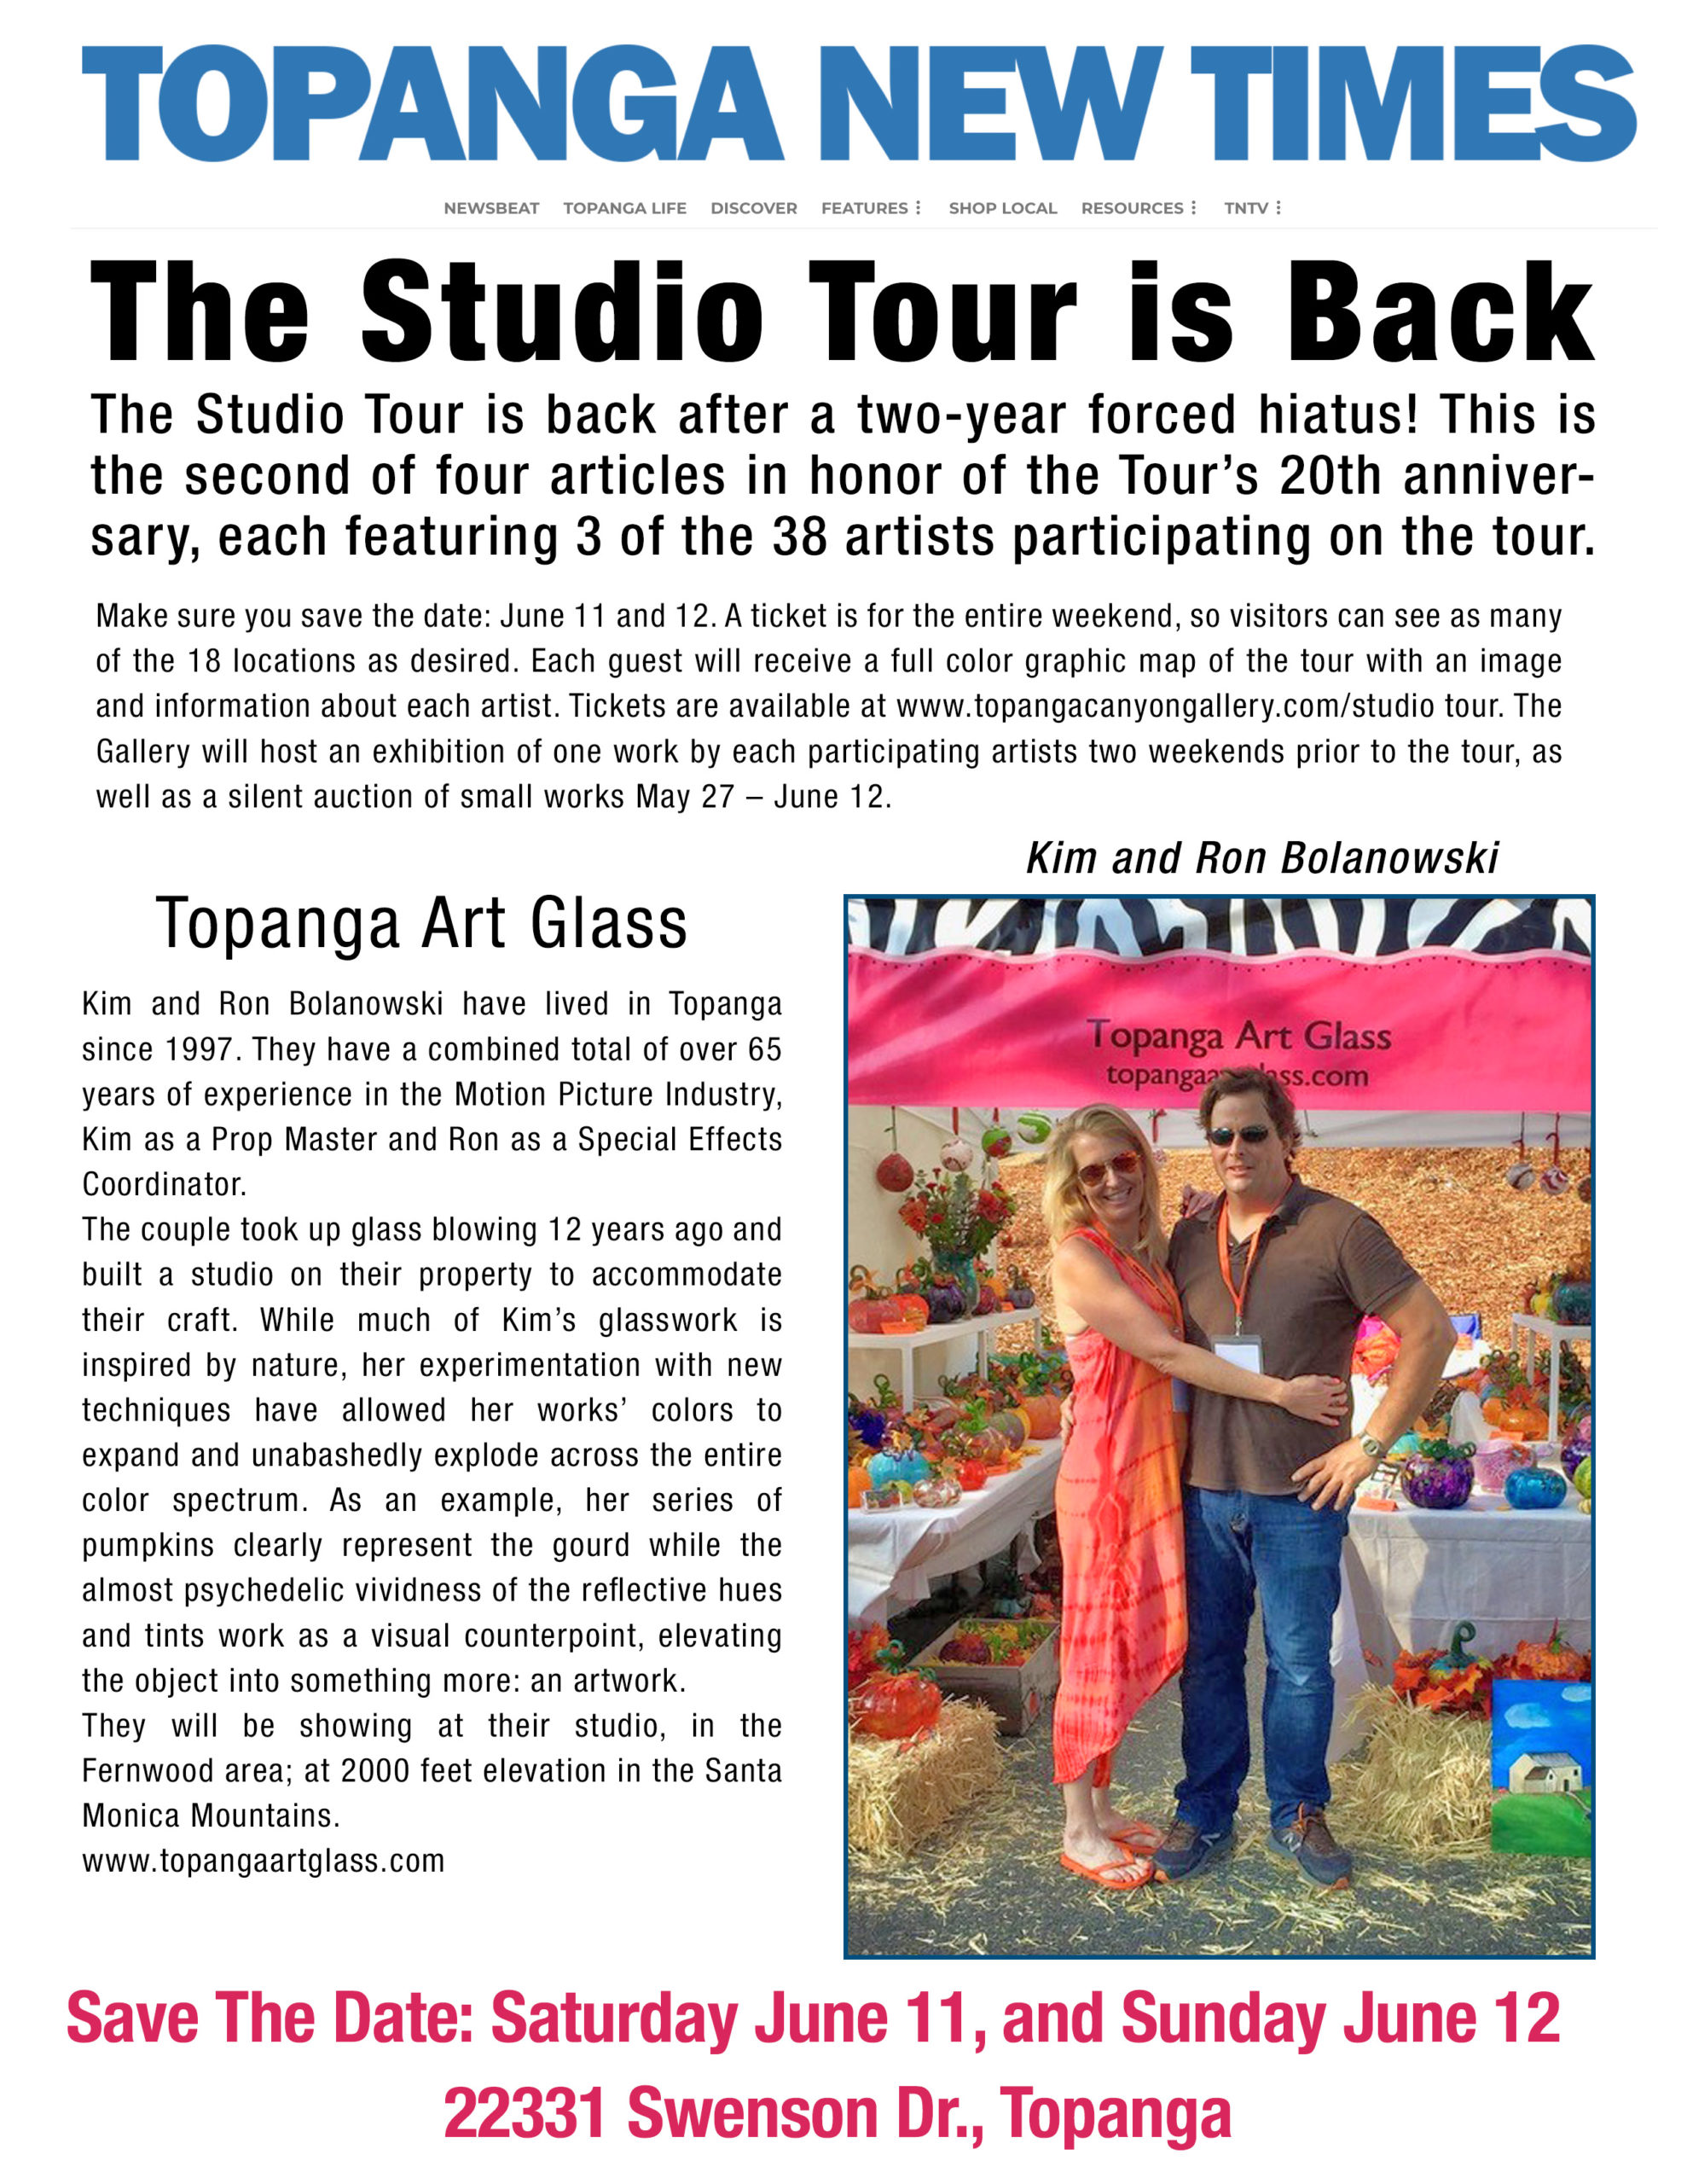 It's time once again for the Topanga Studio Tour 2022!